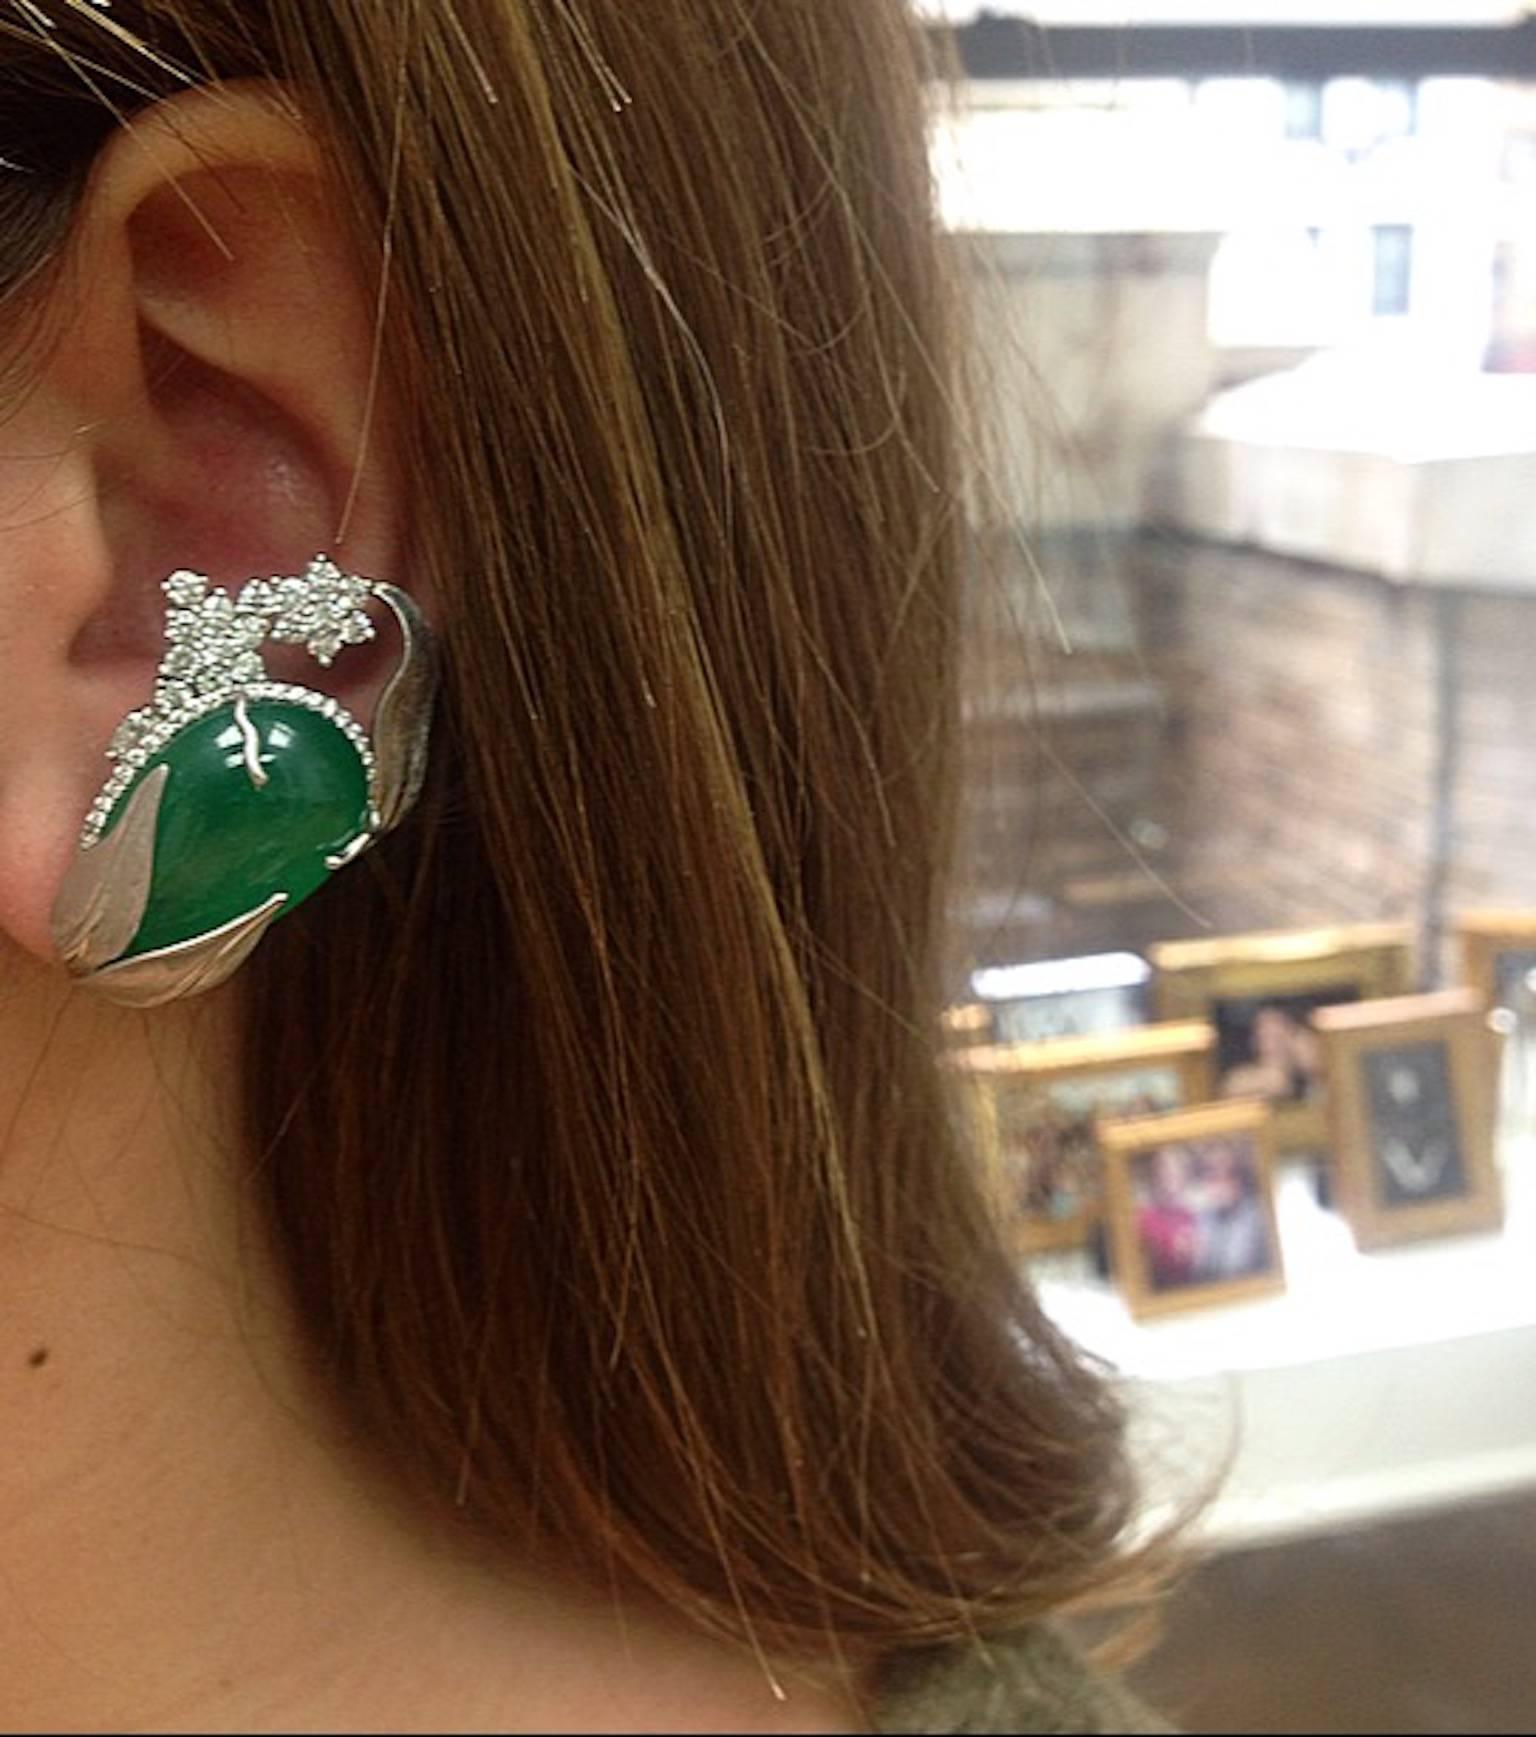 Dramatic, one-of-a-kind Alexandra Mor cuff earrings featuring matching Drop-shaped natural green Emeralds weighing 52.58 Cts., encircled by Alexandra Mor's signature details of 1mm floating Diamond melee, and knife-edged wire. Earrings are further